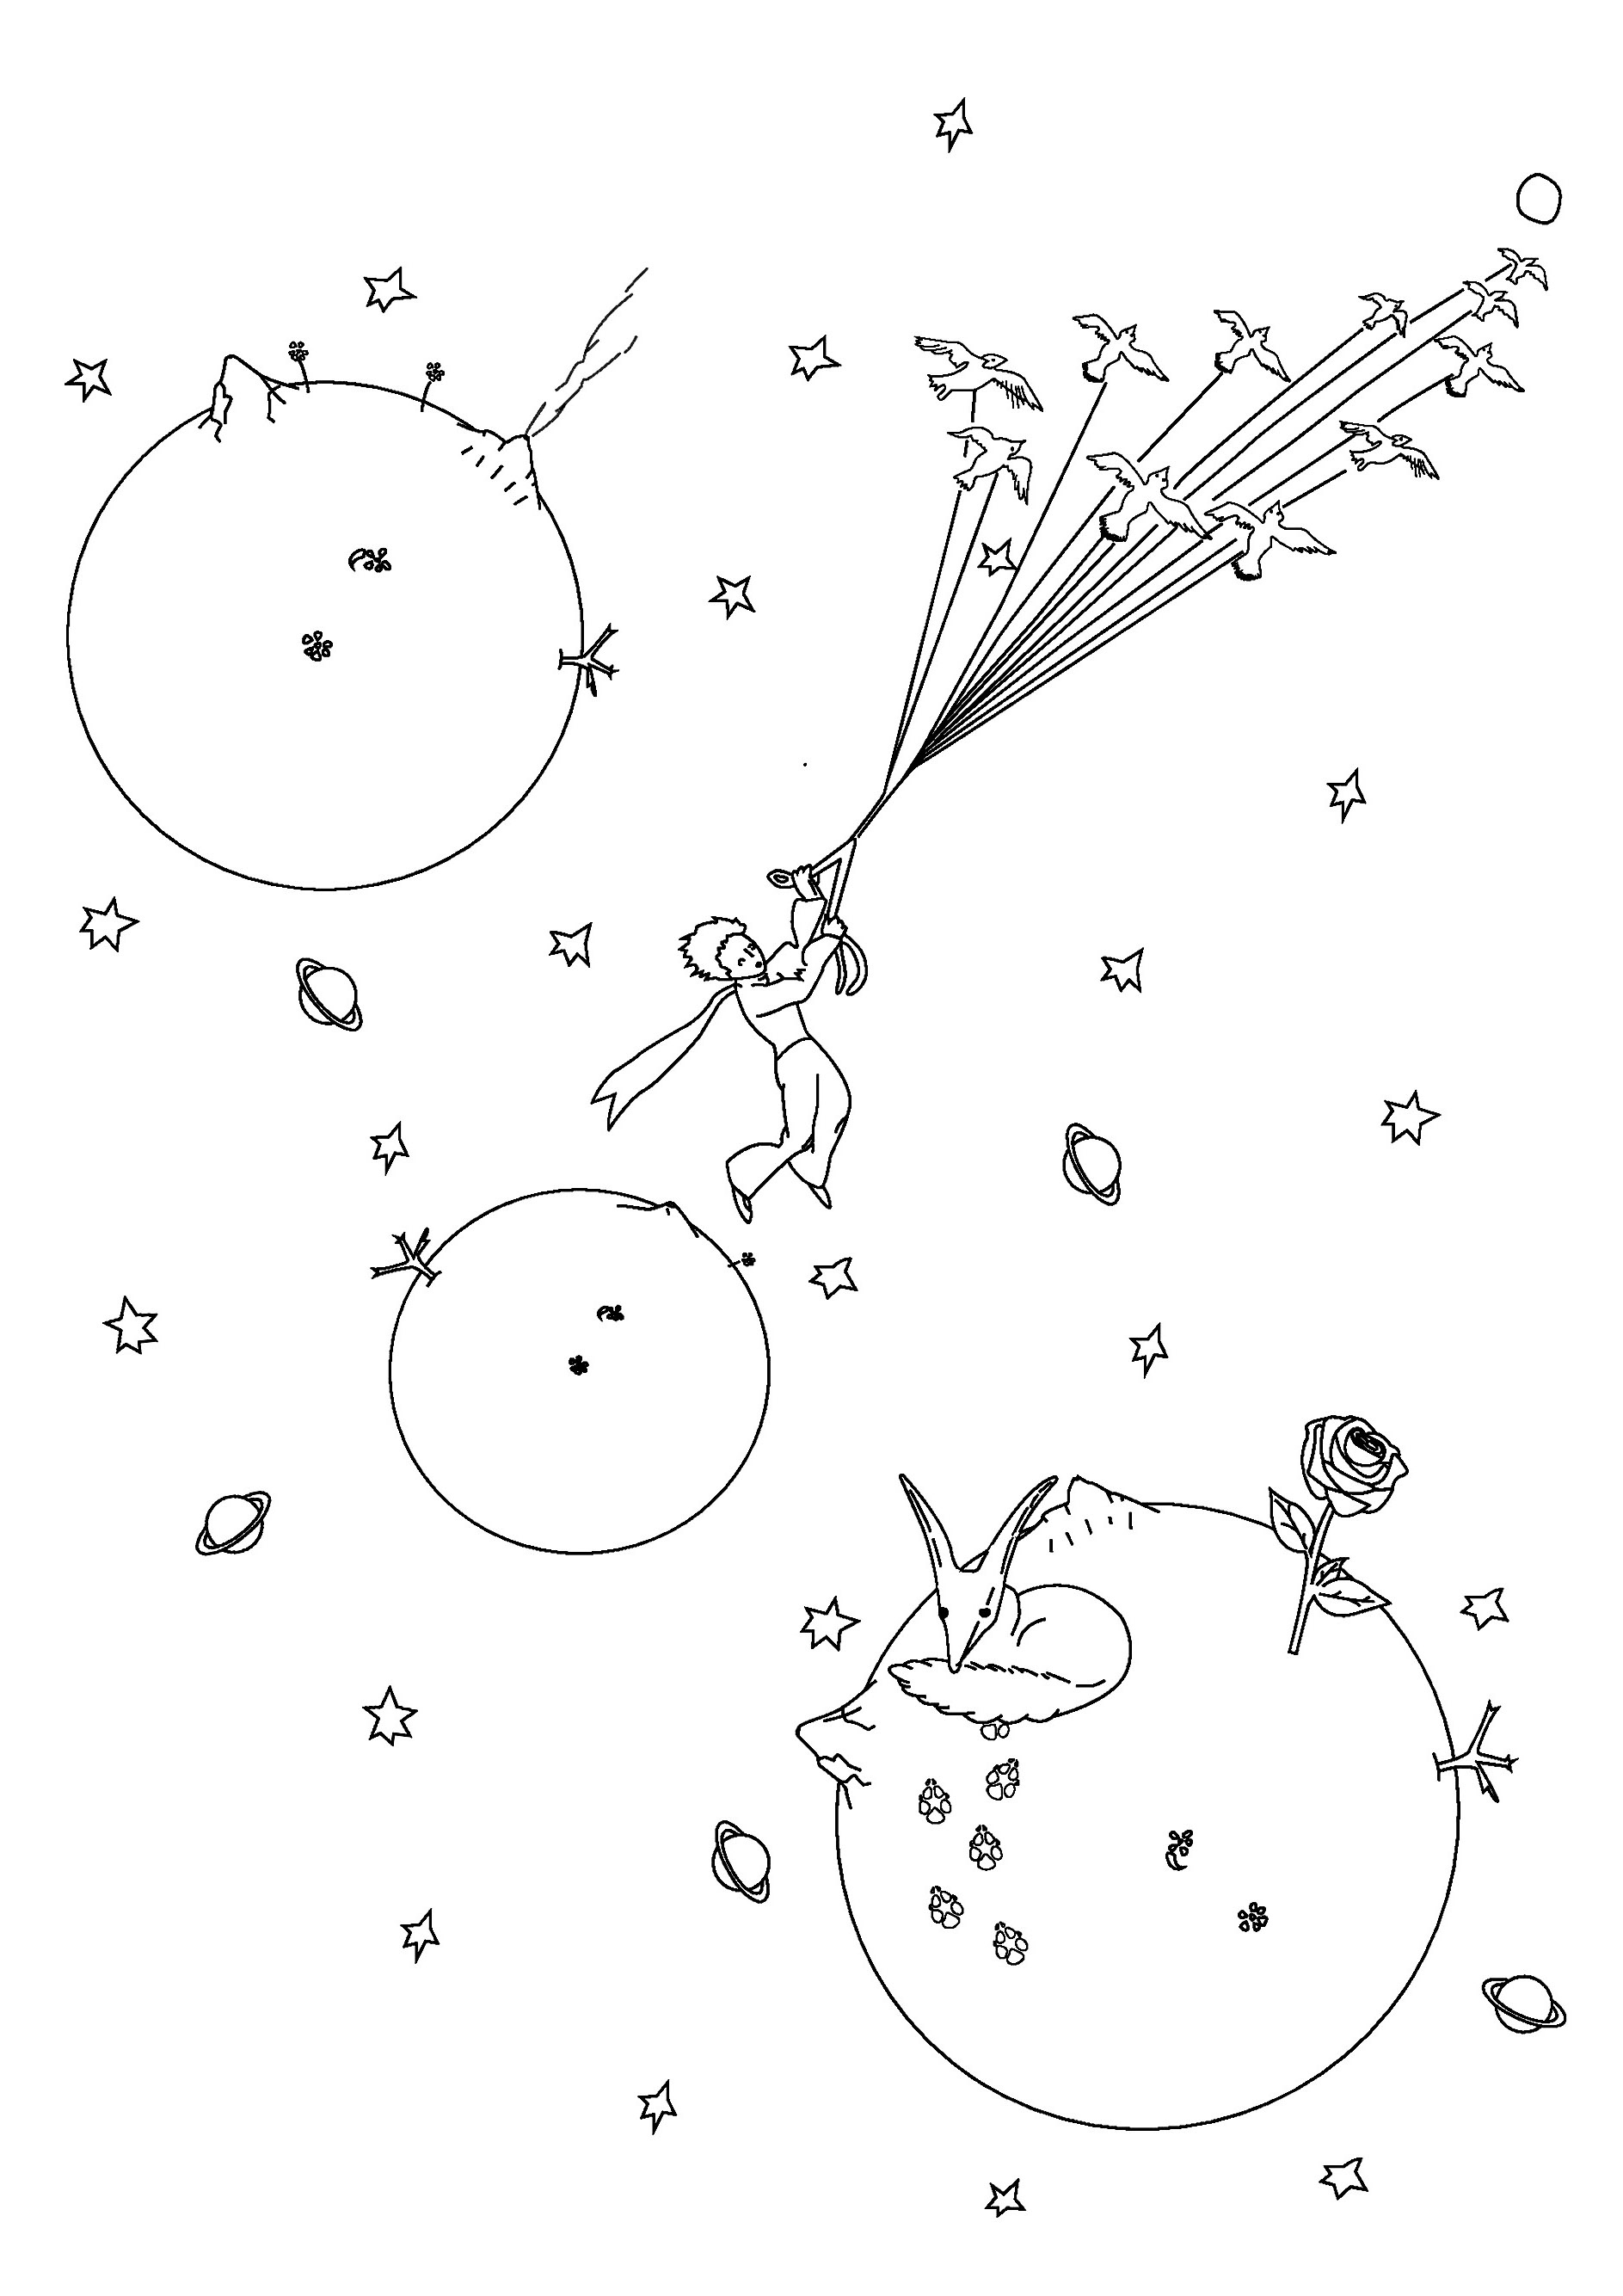 Color the Little Prince in flight in space, thanks to his magical shooting stars